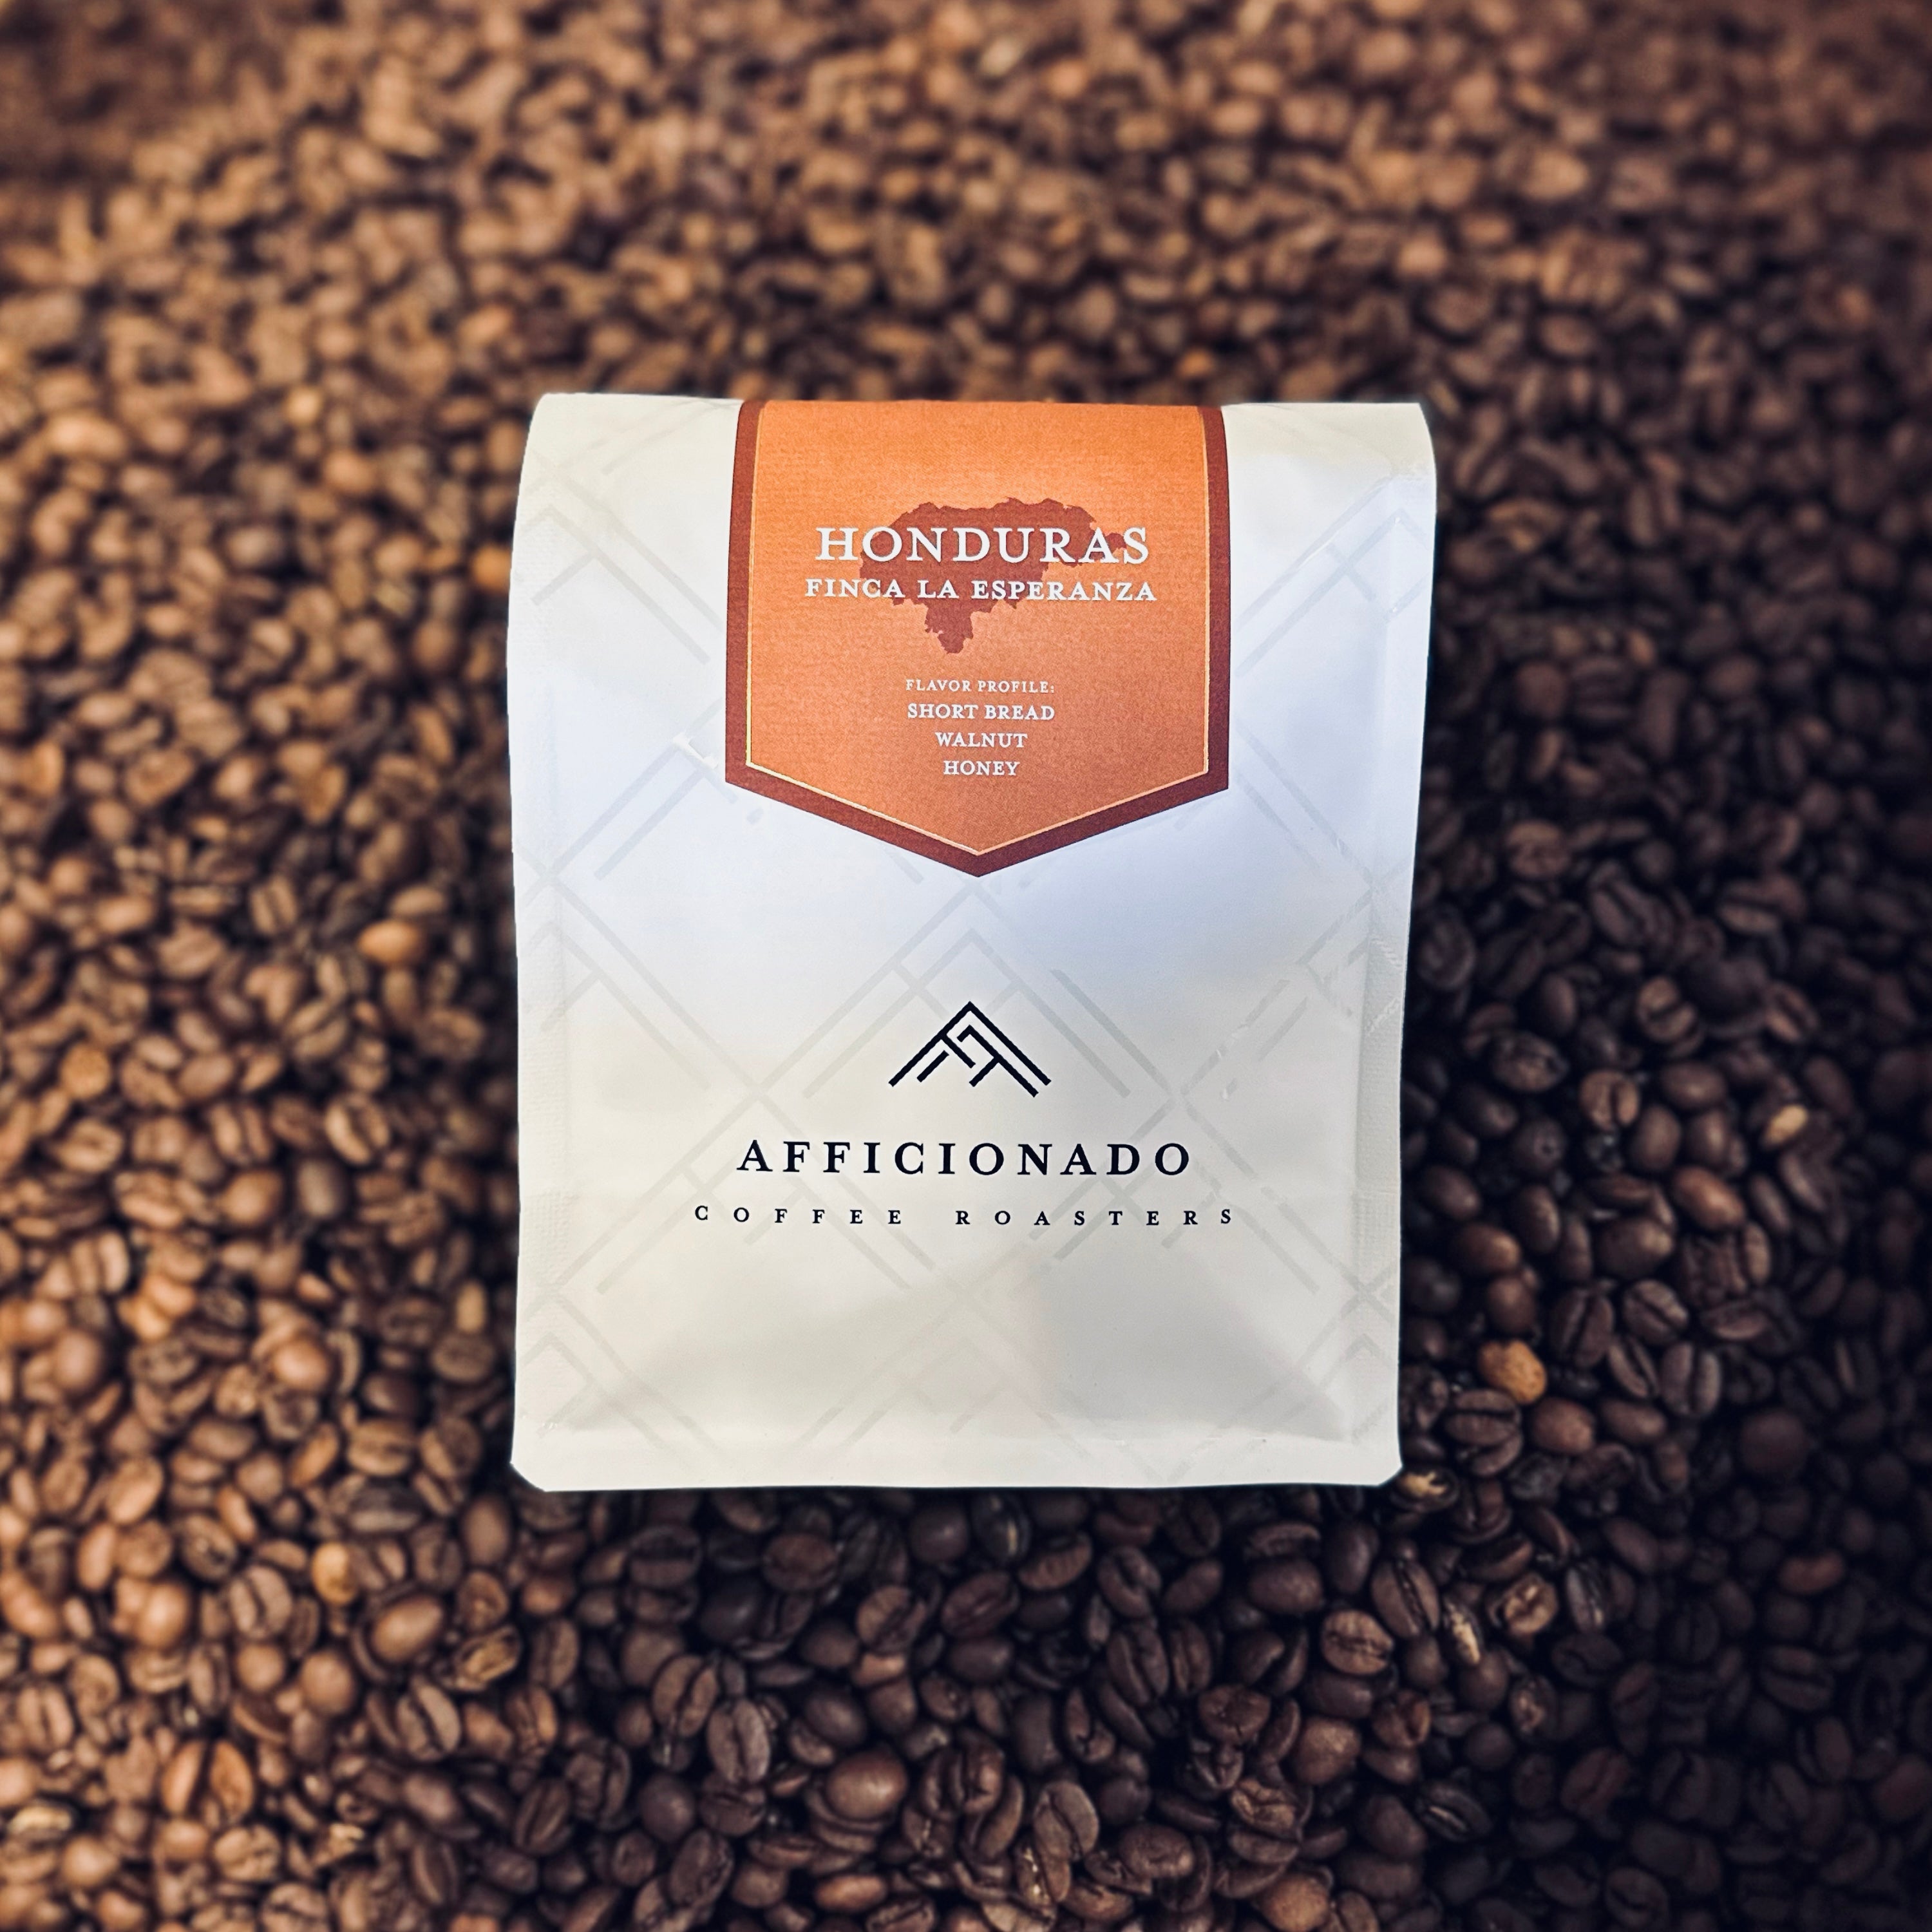 Join the Afficionado team on our journey through Honduras in search of exceptional specialty coffee. Saludos!